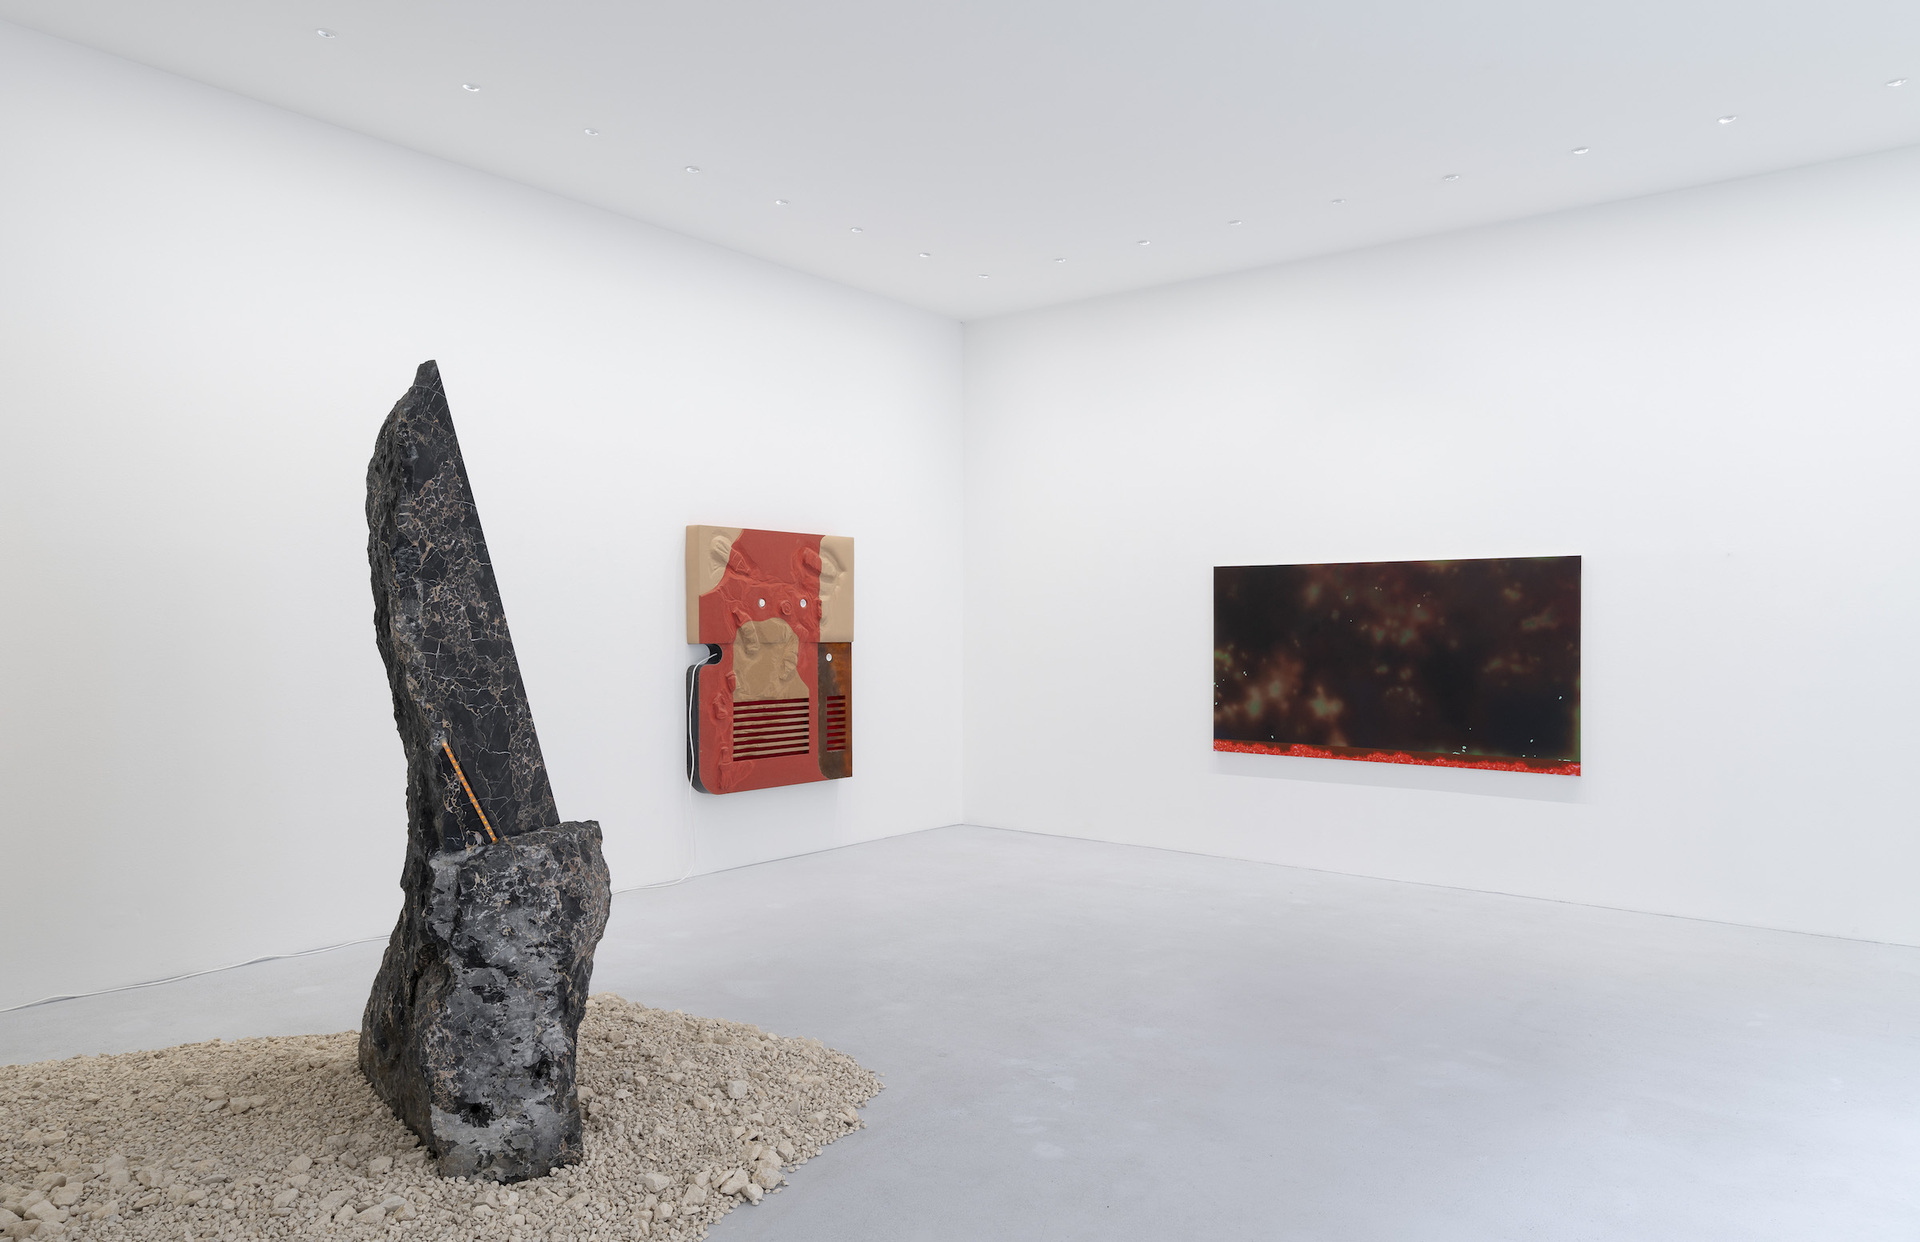 Installation view chasing another tomorrow, max goelitz, 2020 | Photo: Dirk Tacke